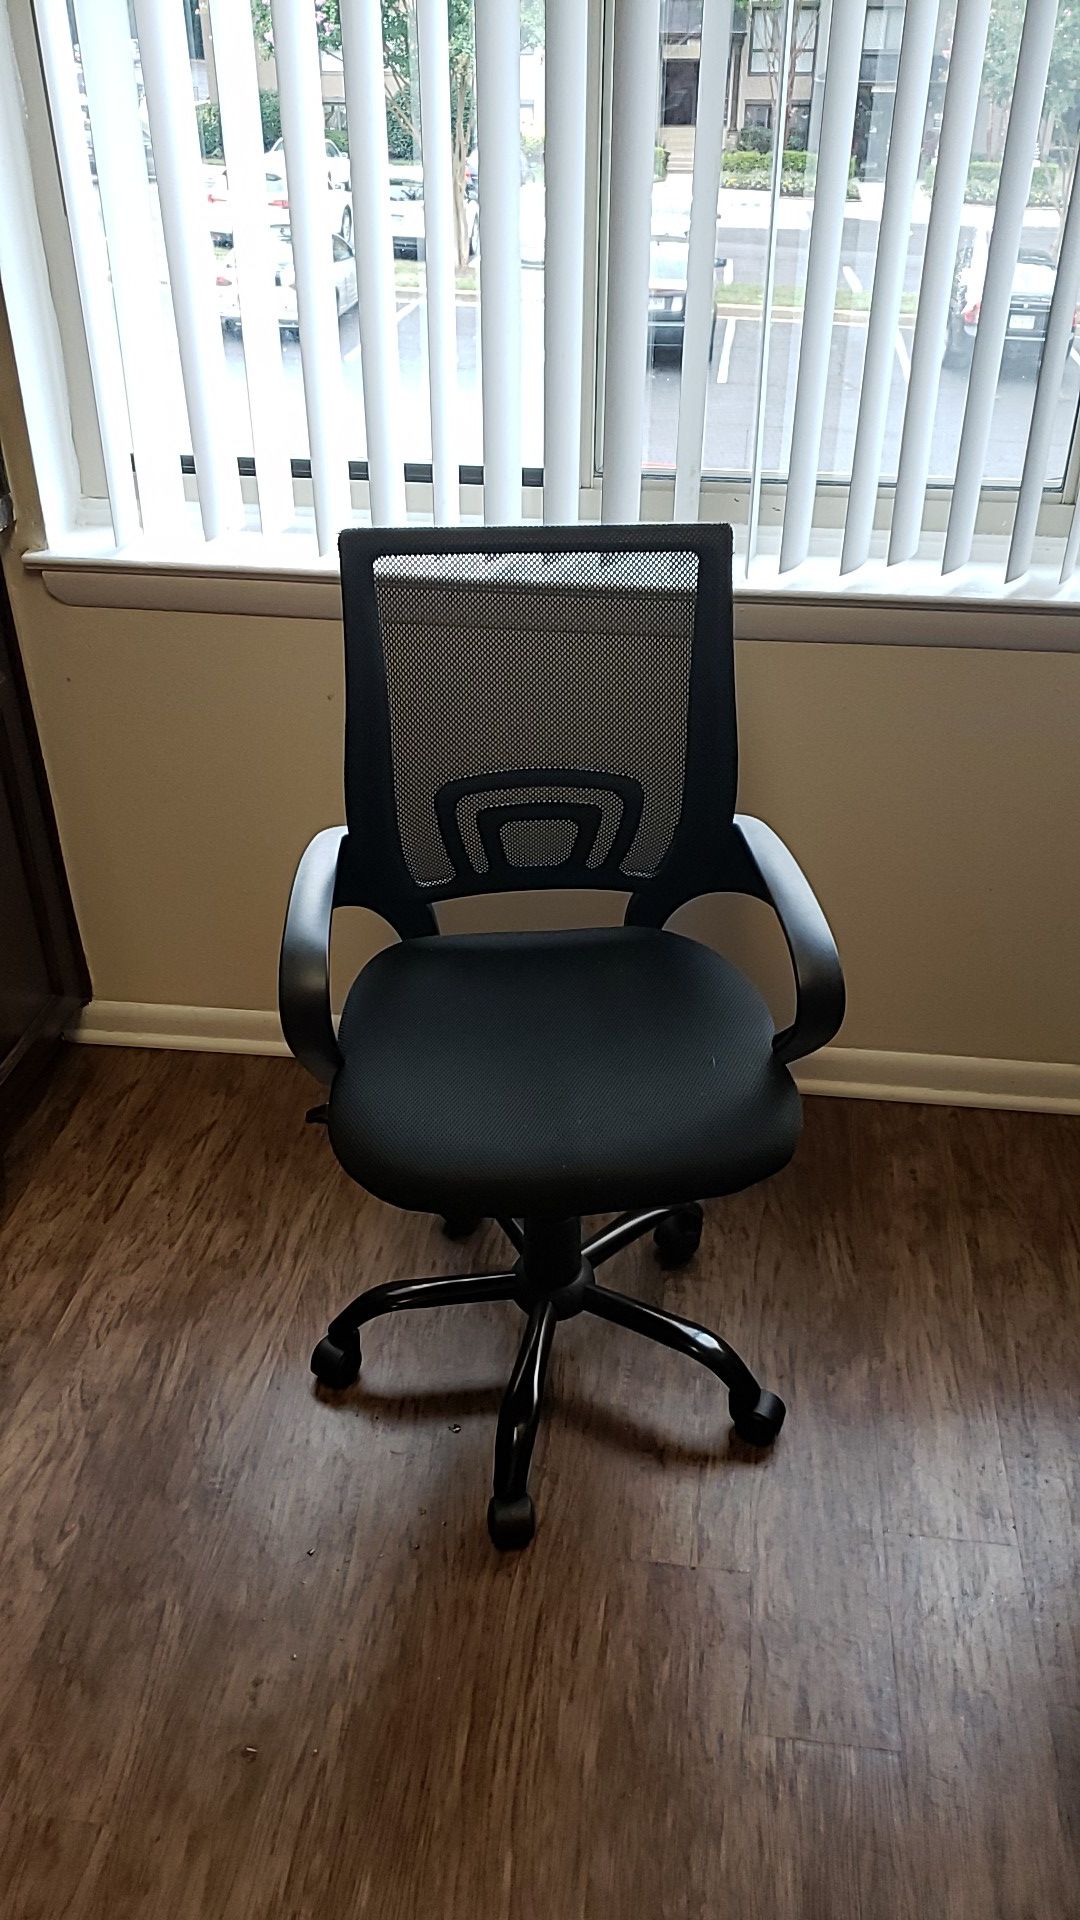 One roller office chair and six office chairs